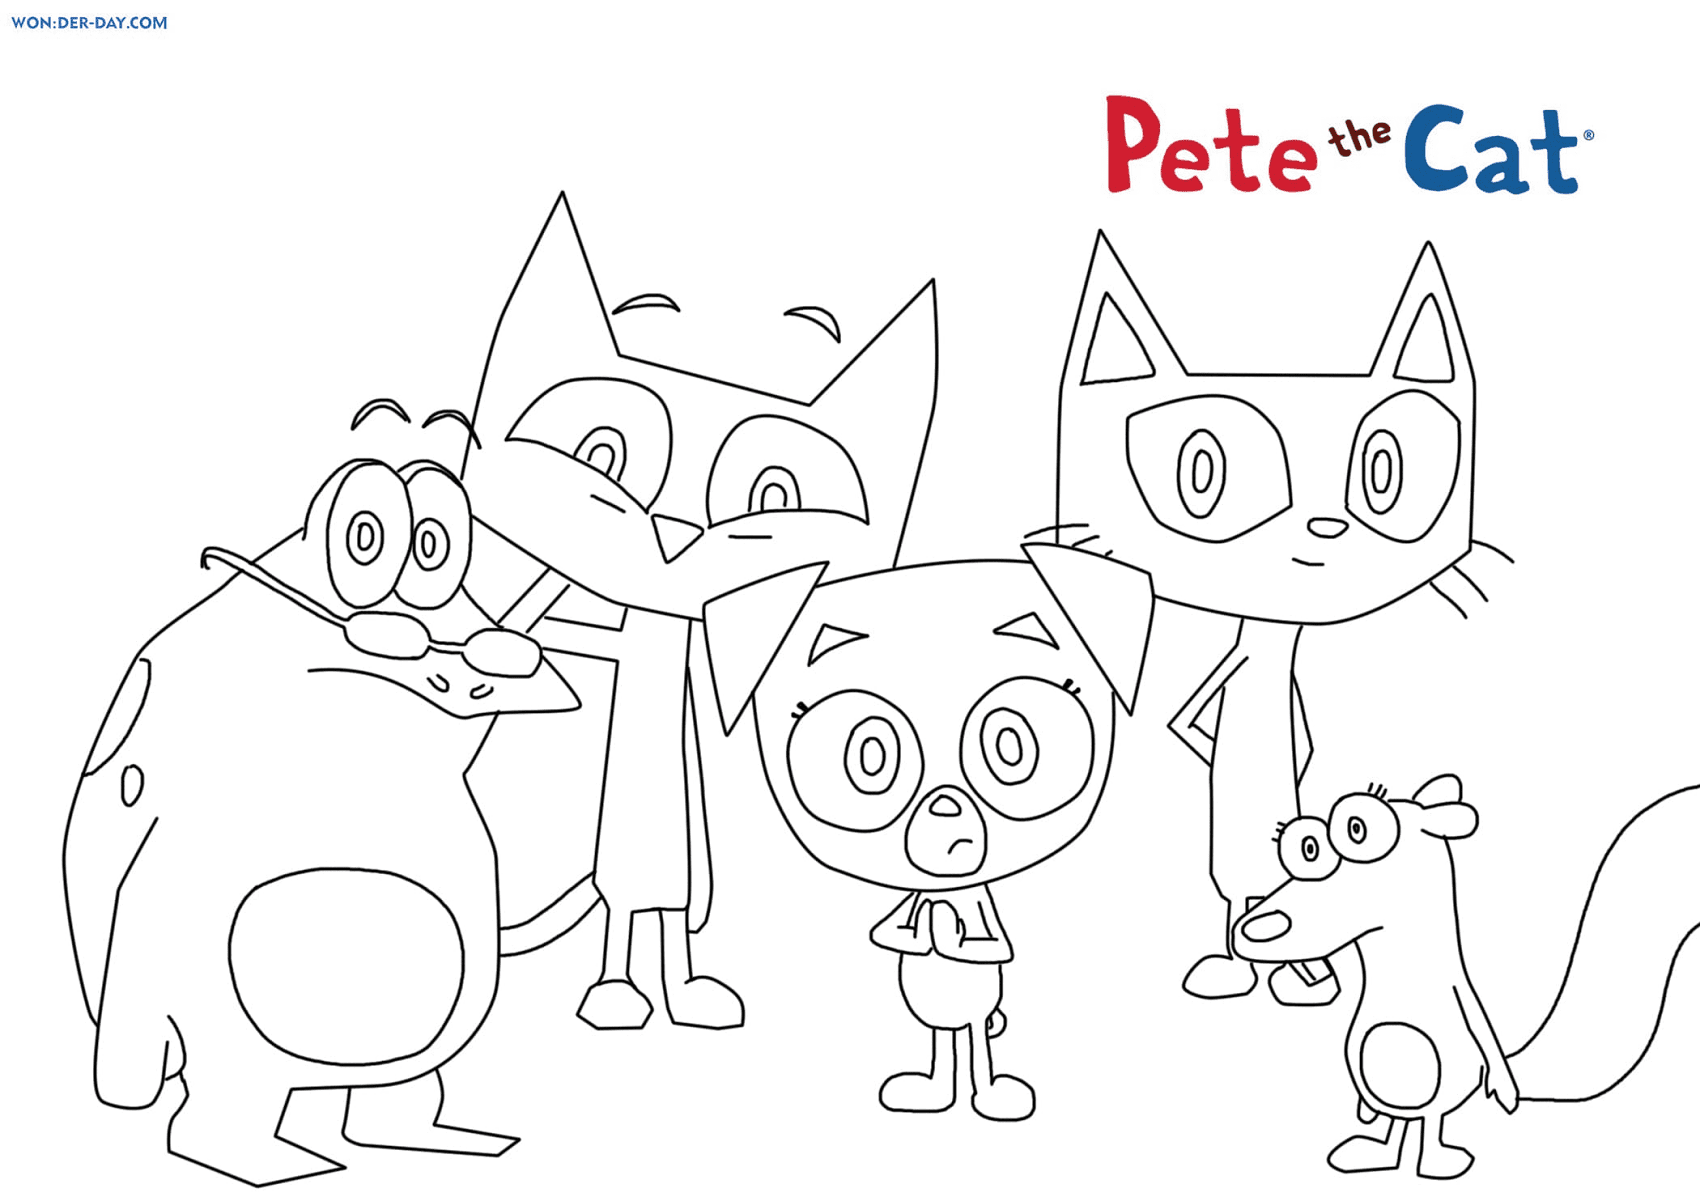 Pete the Cat and his Friends Coloring Pages